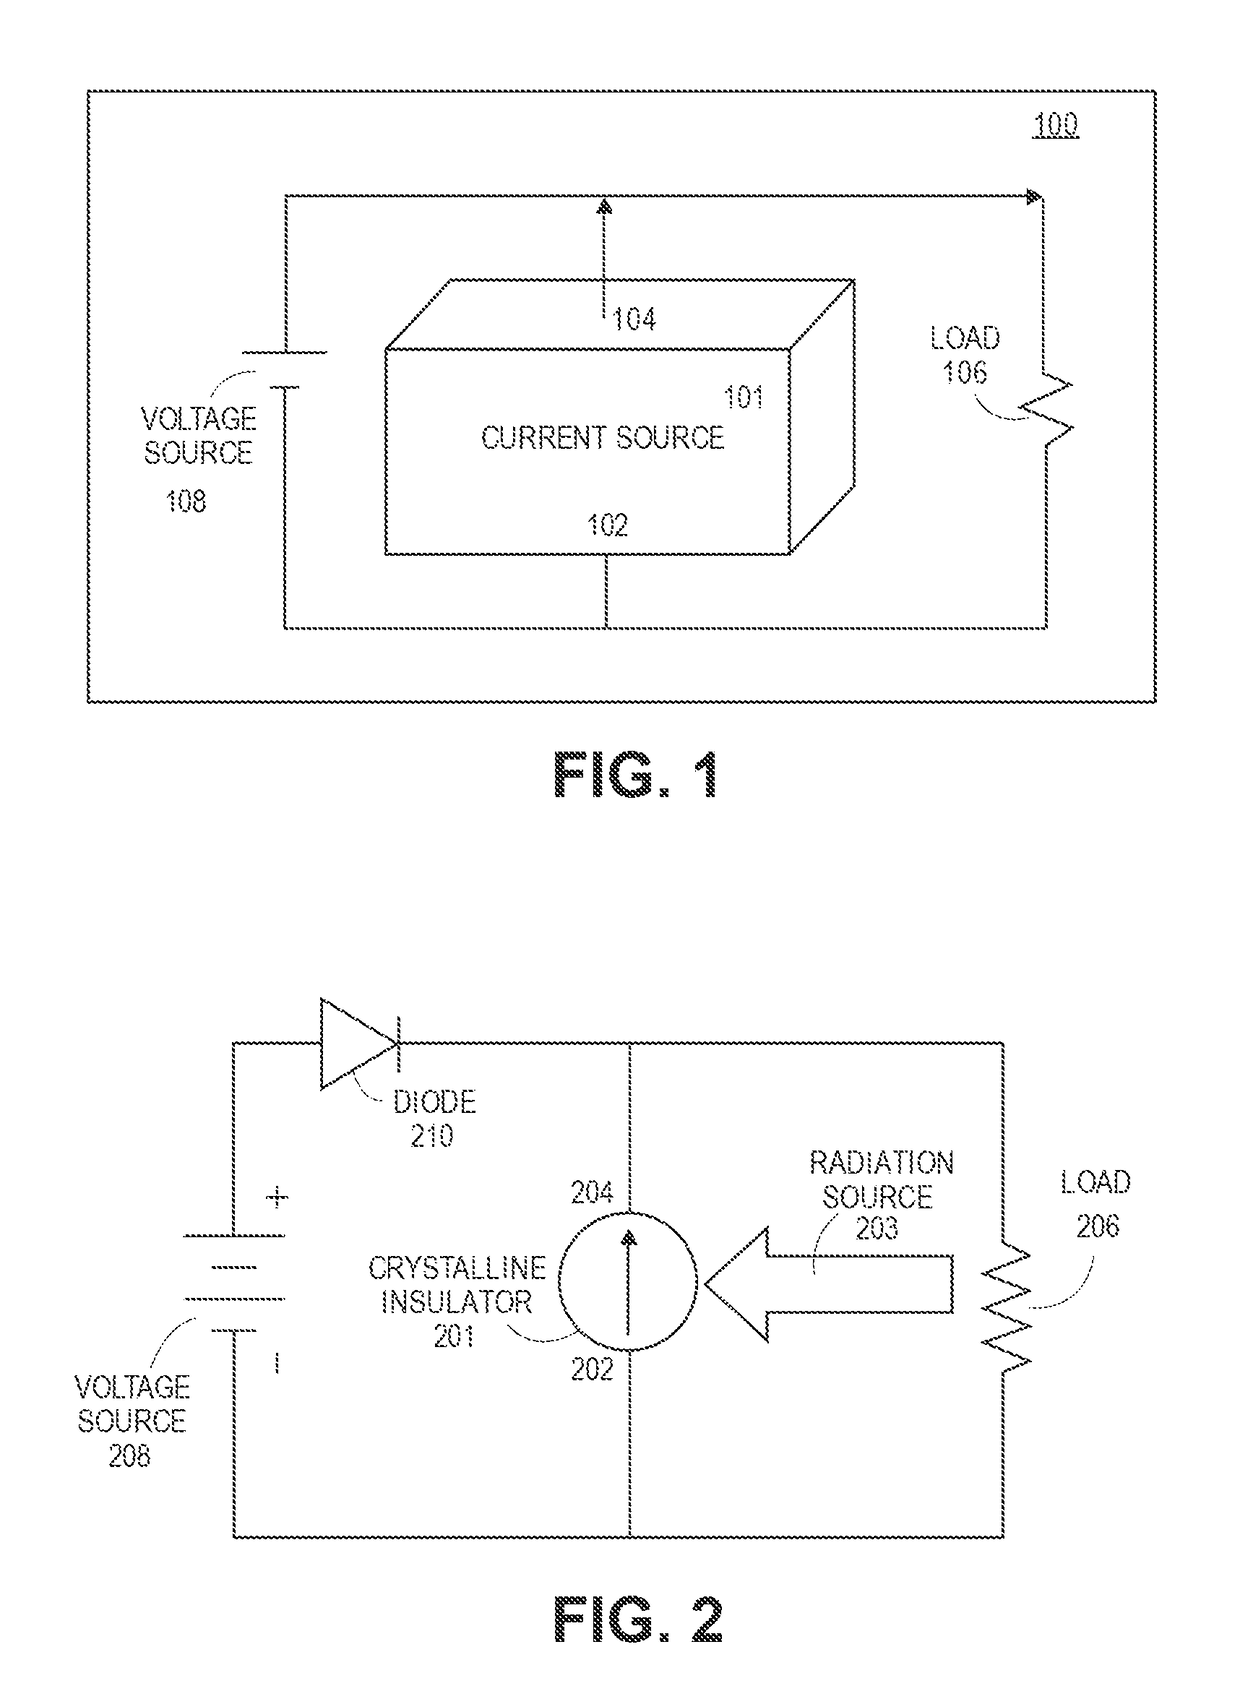 Solid-state nuclear energy conversion system